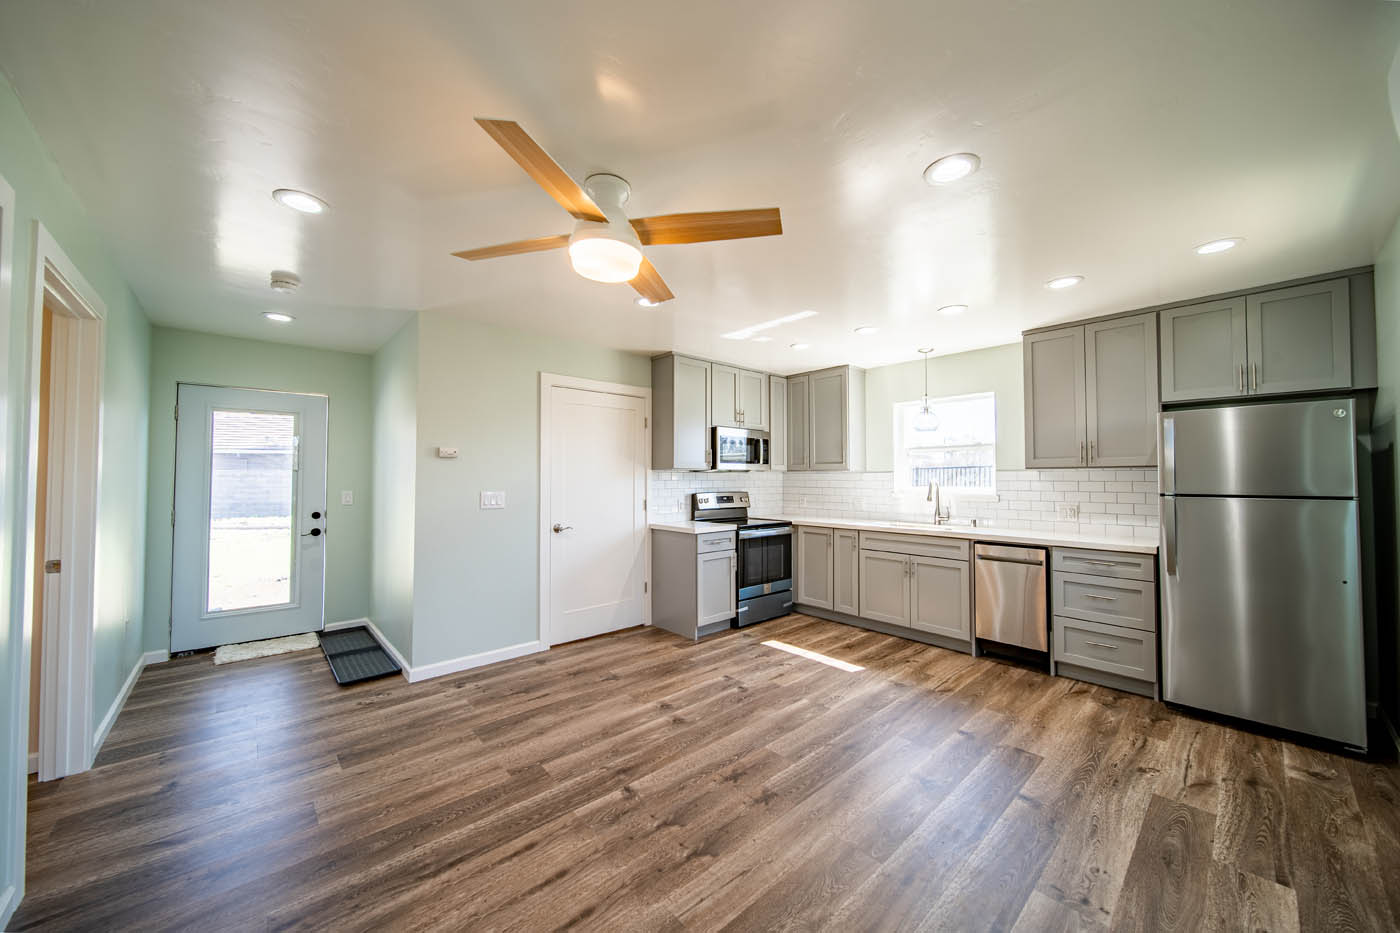 Anchored Tiny Homes East Bay ADU Gallery: 2-Bedroom ADUs. - 6